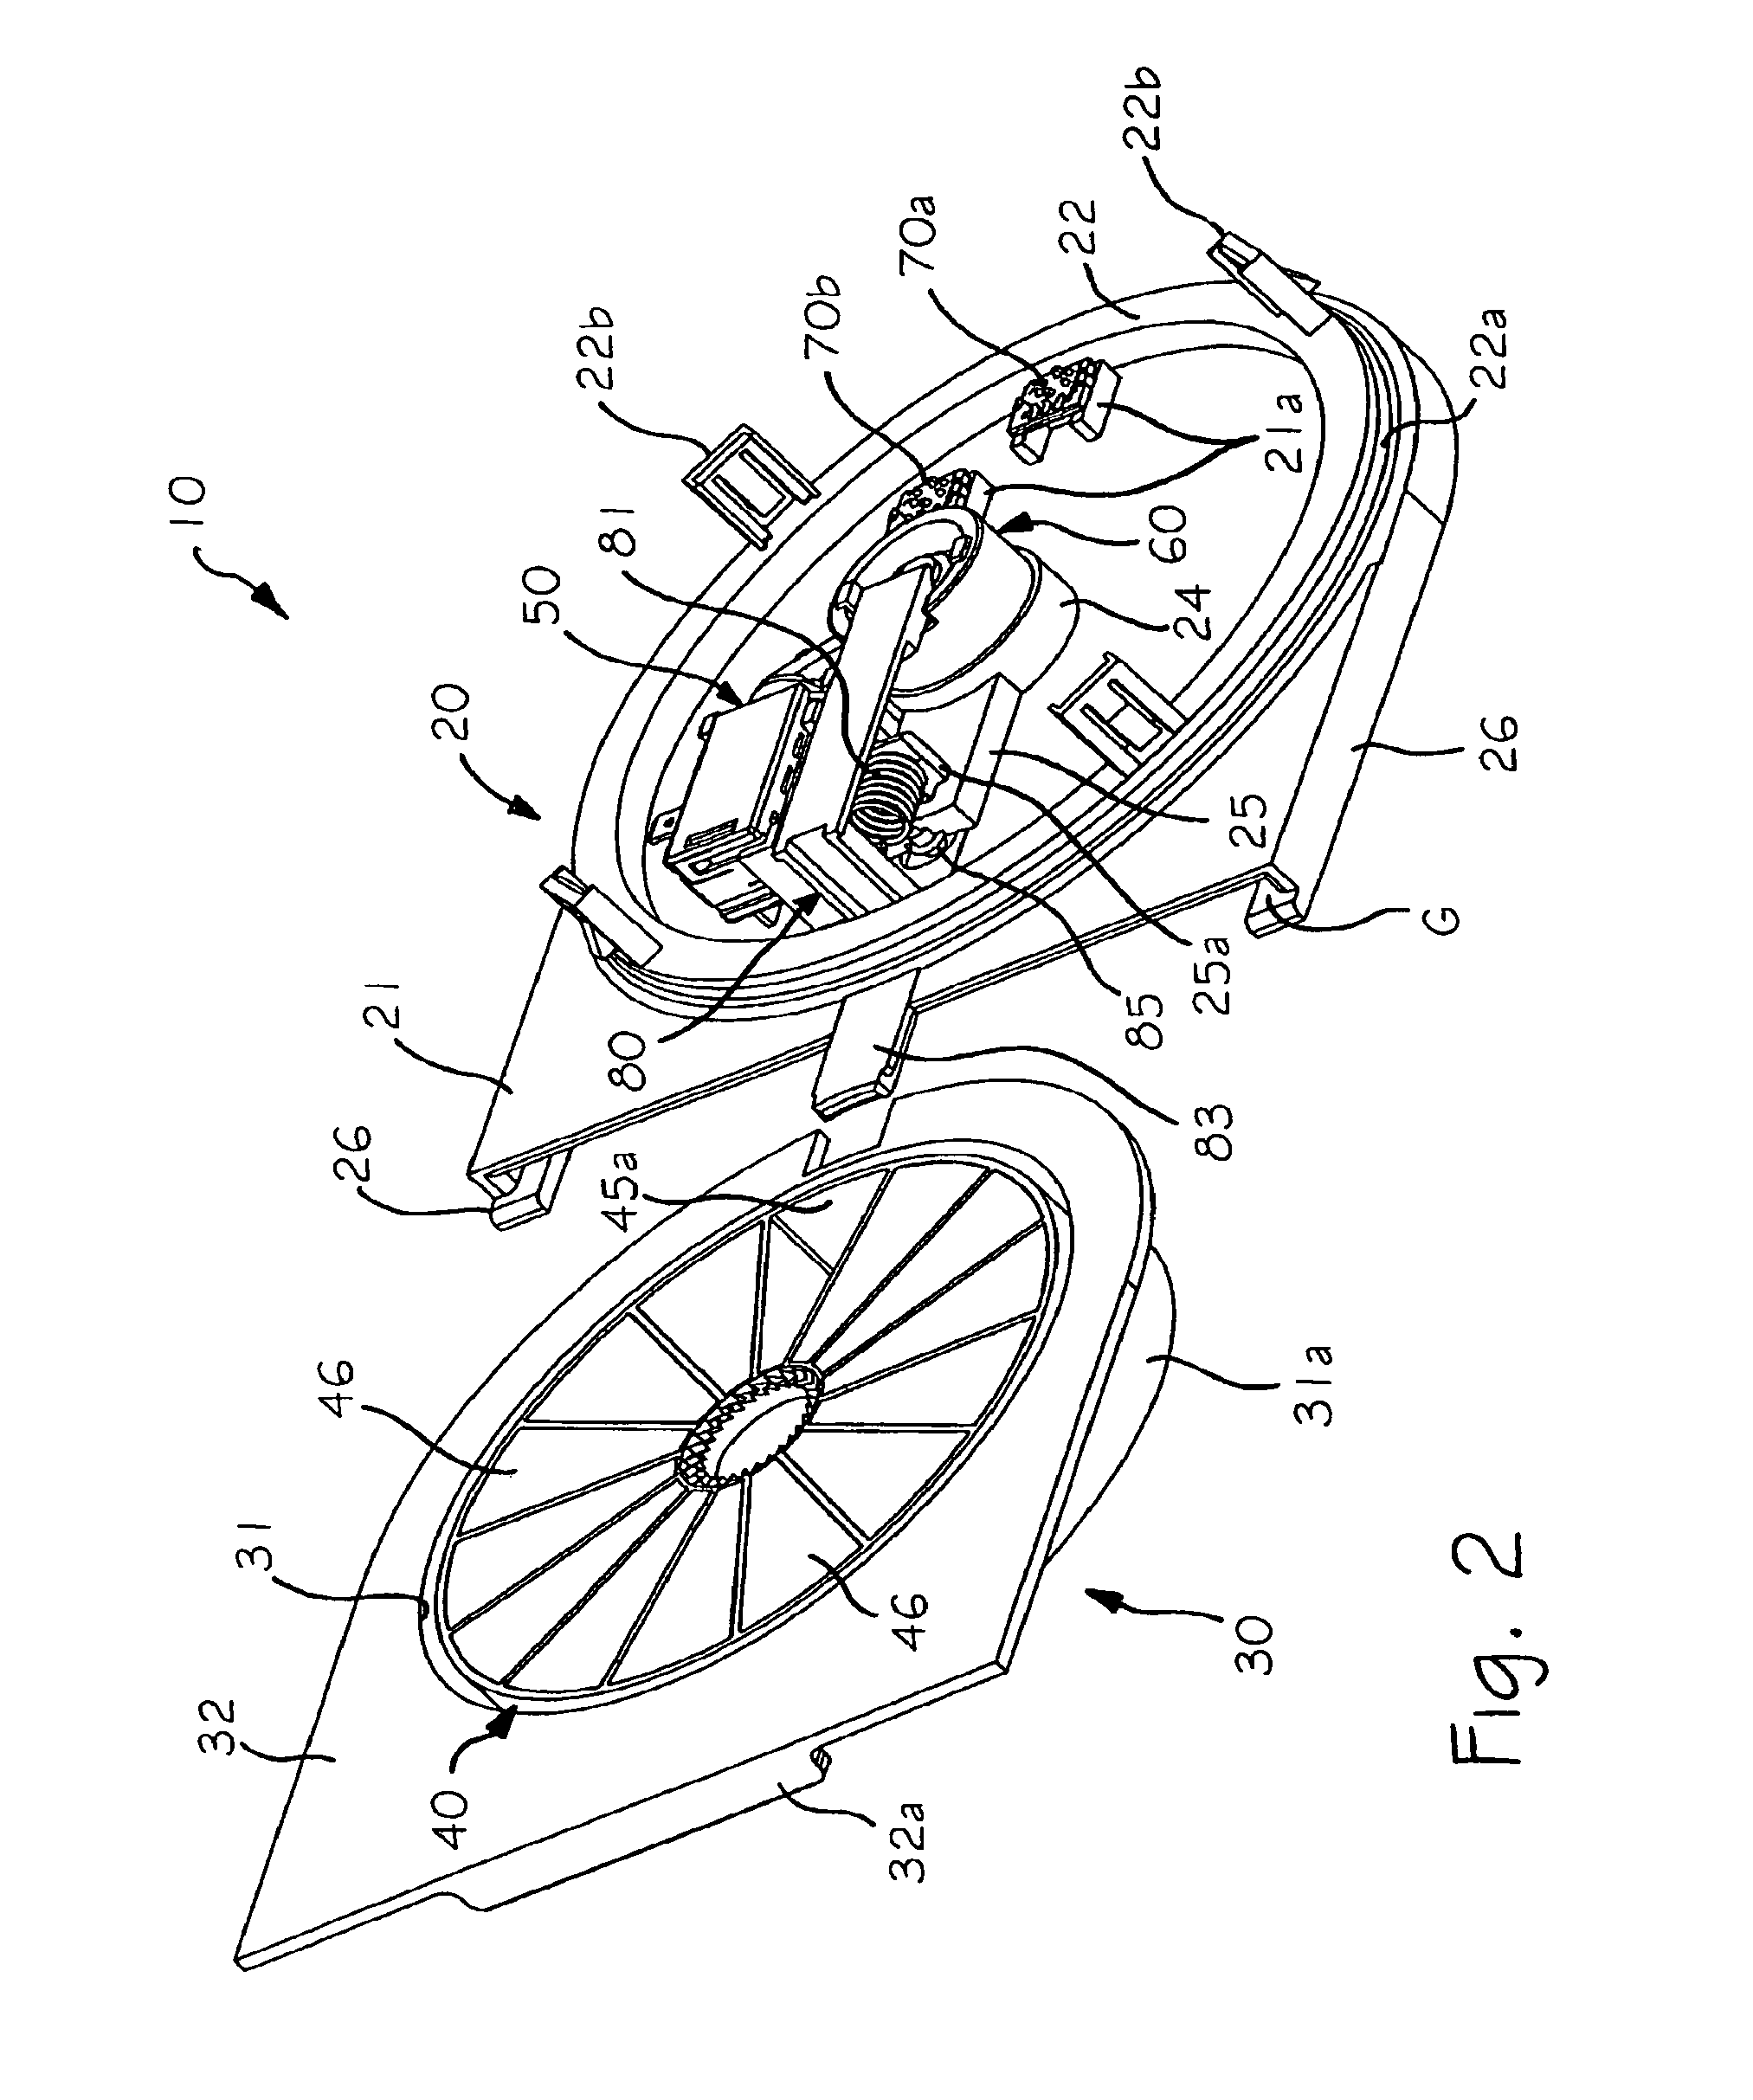 Dispensing device, particularly for domestic appliances